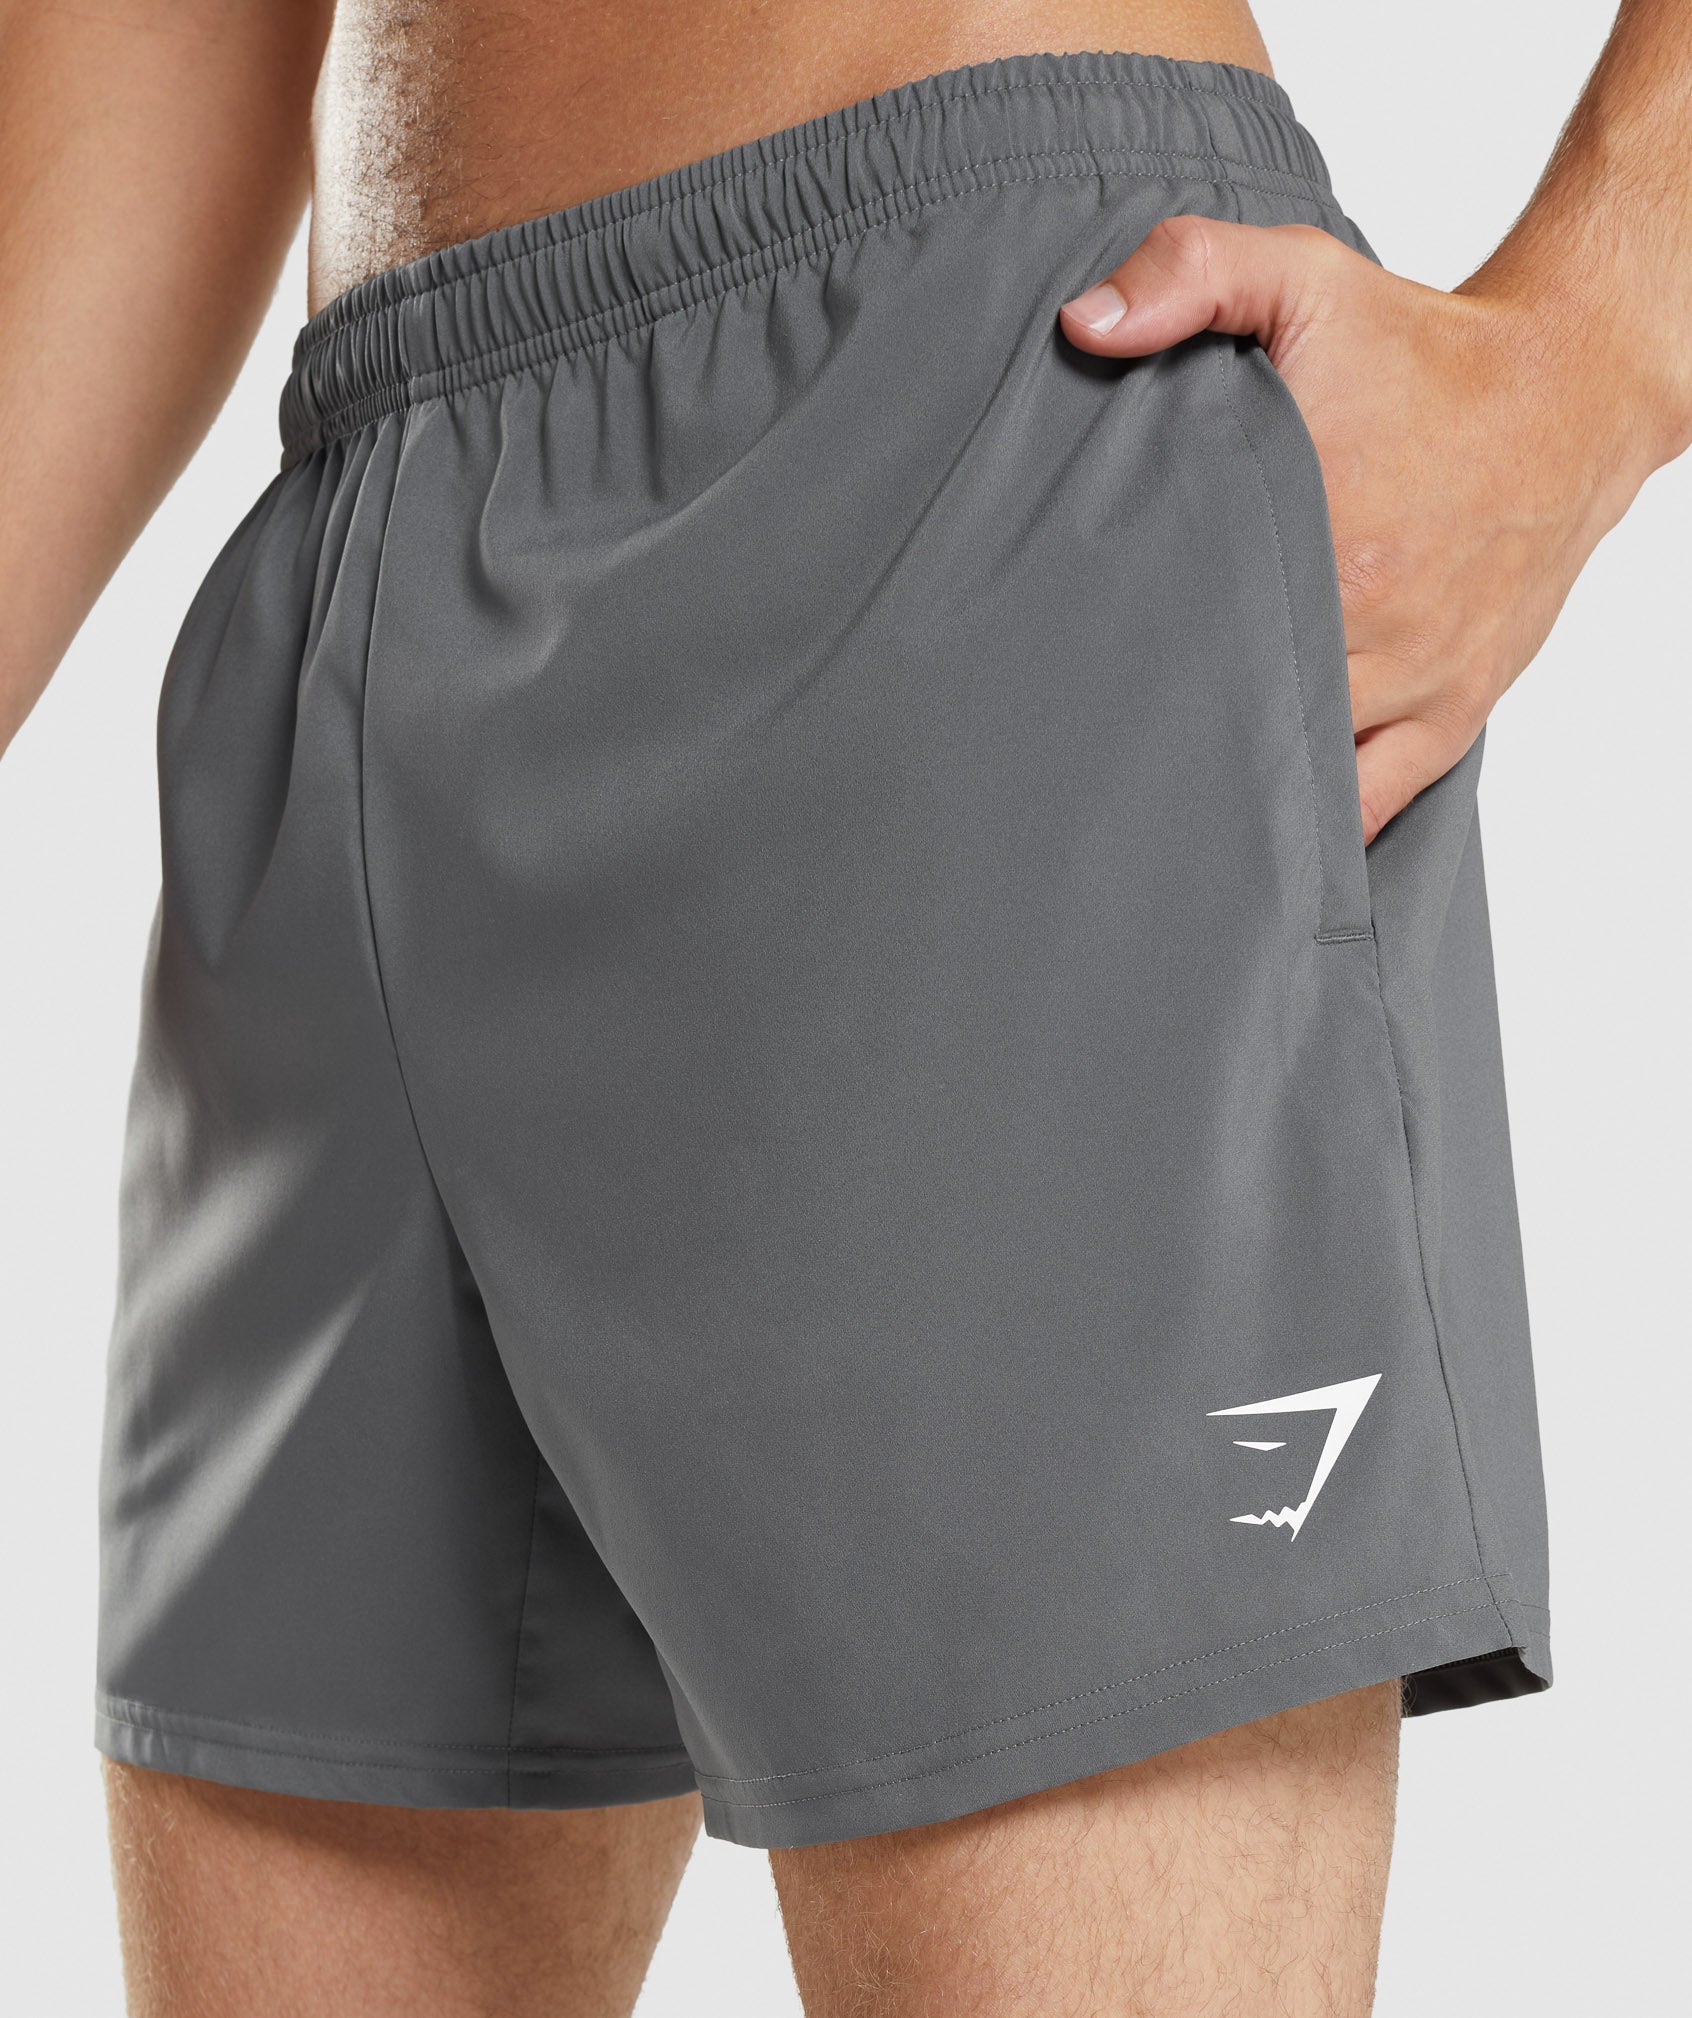 Arrival 5" Shorts in Charcoal - view 5